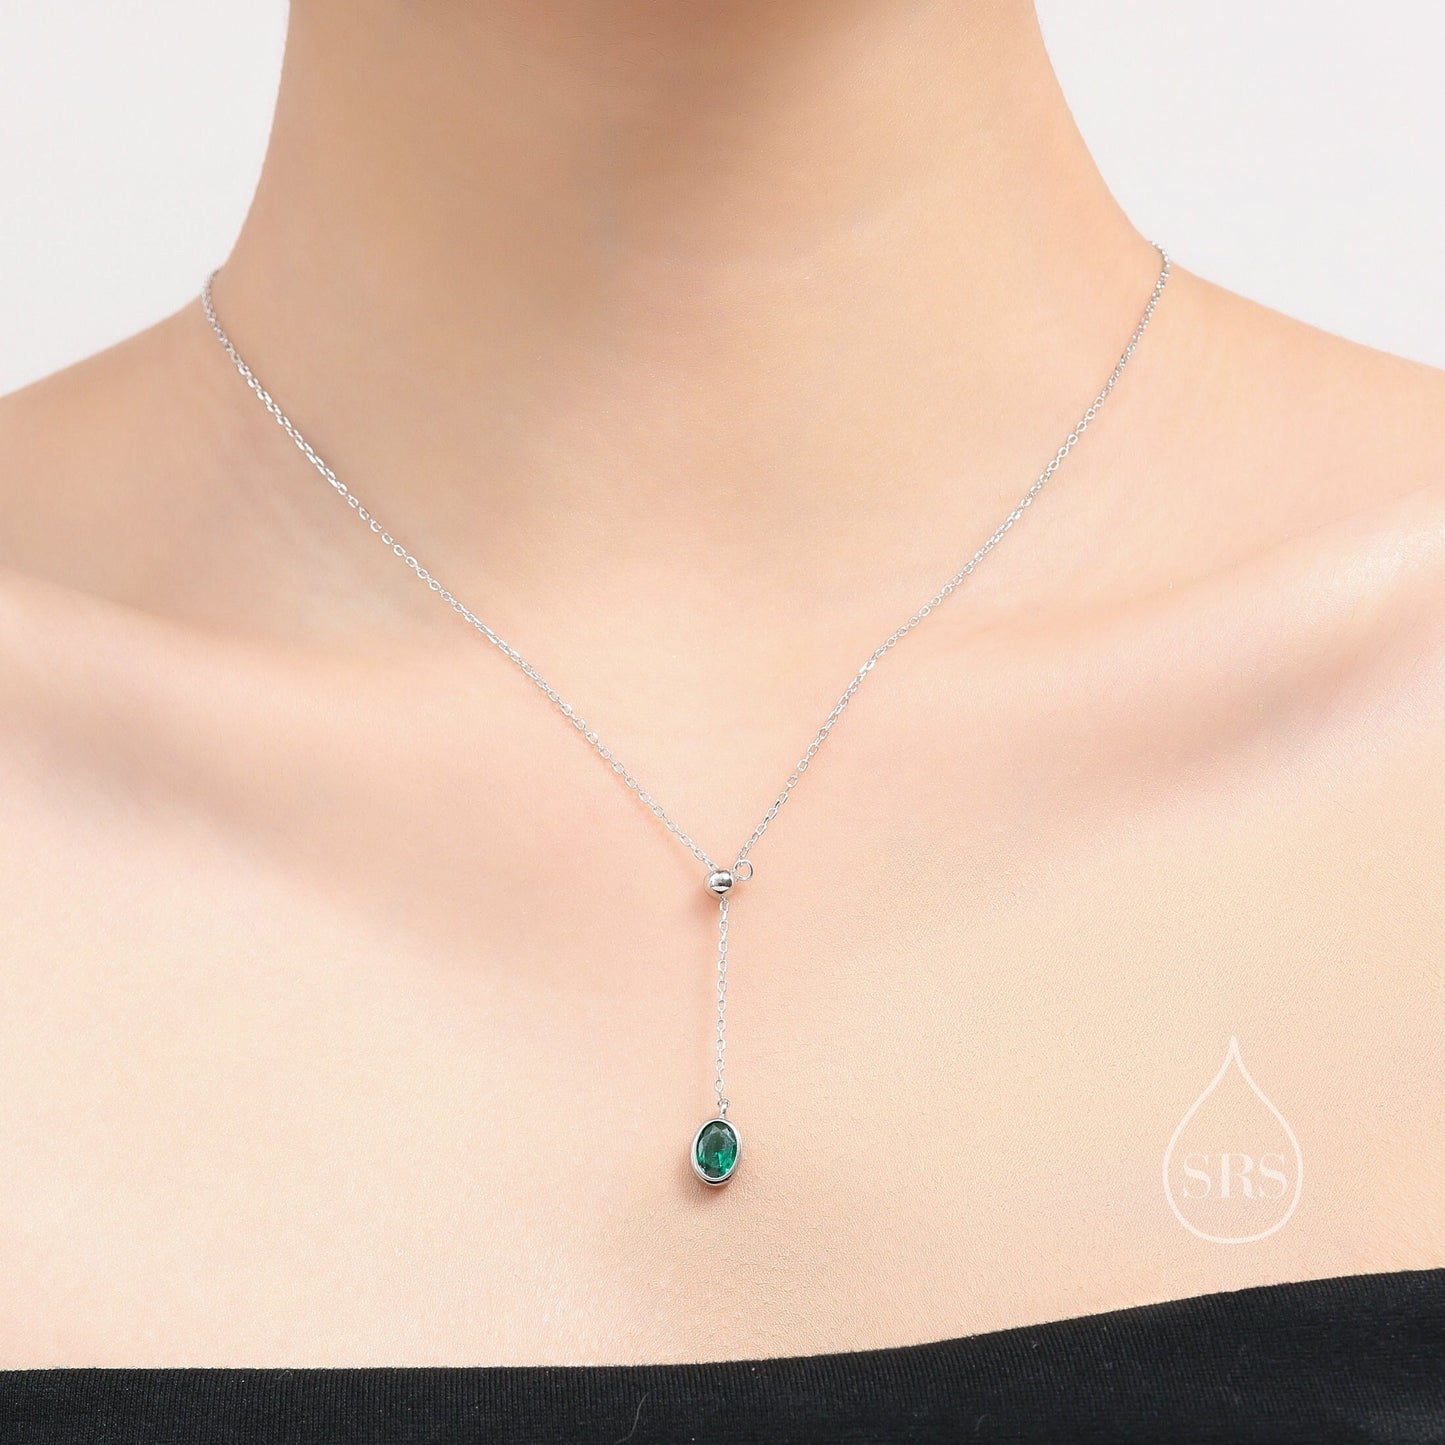 Delicate Emerald Green Oval CZ Lariat Pendant Necklace in Sterling Silver, Silver or Gold, Minimalist Oval Shape CZ Adjustable Necklace